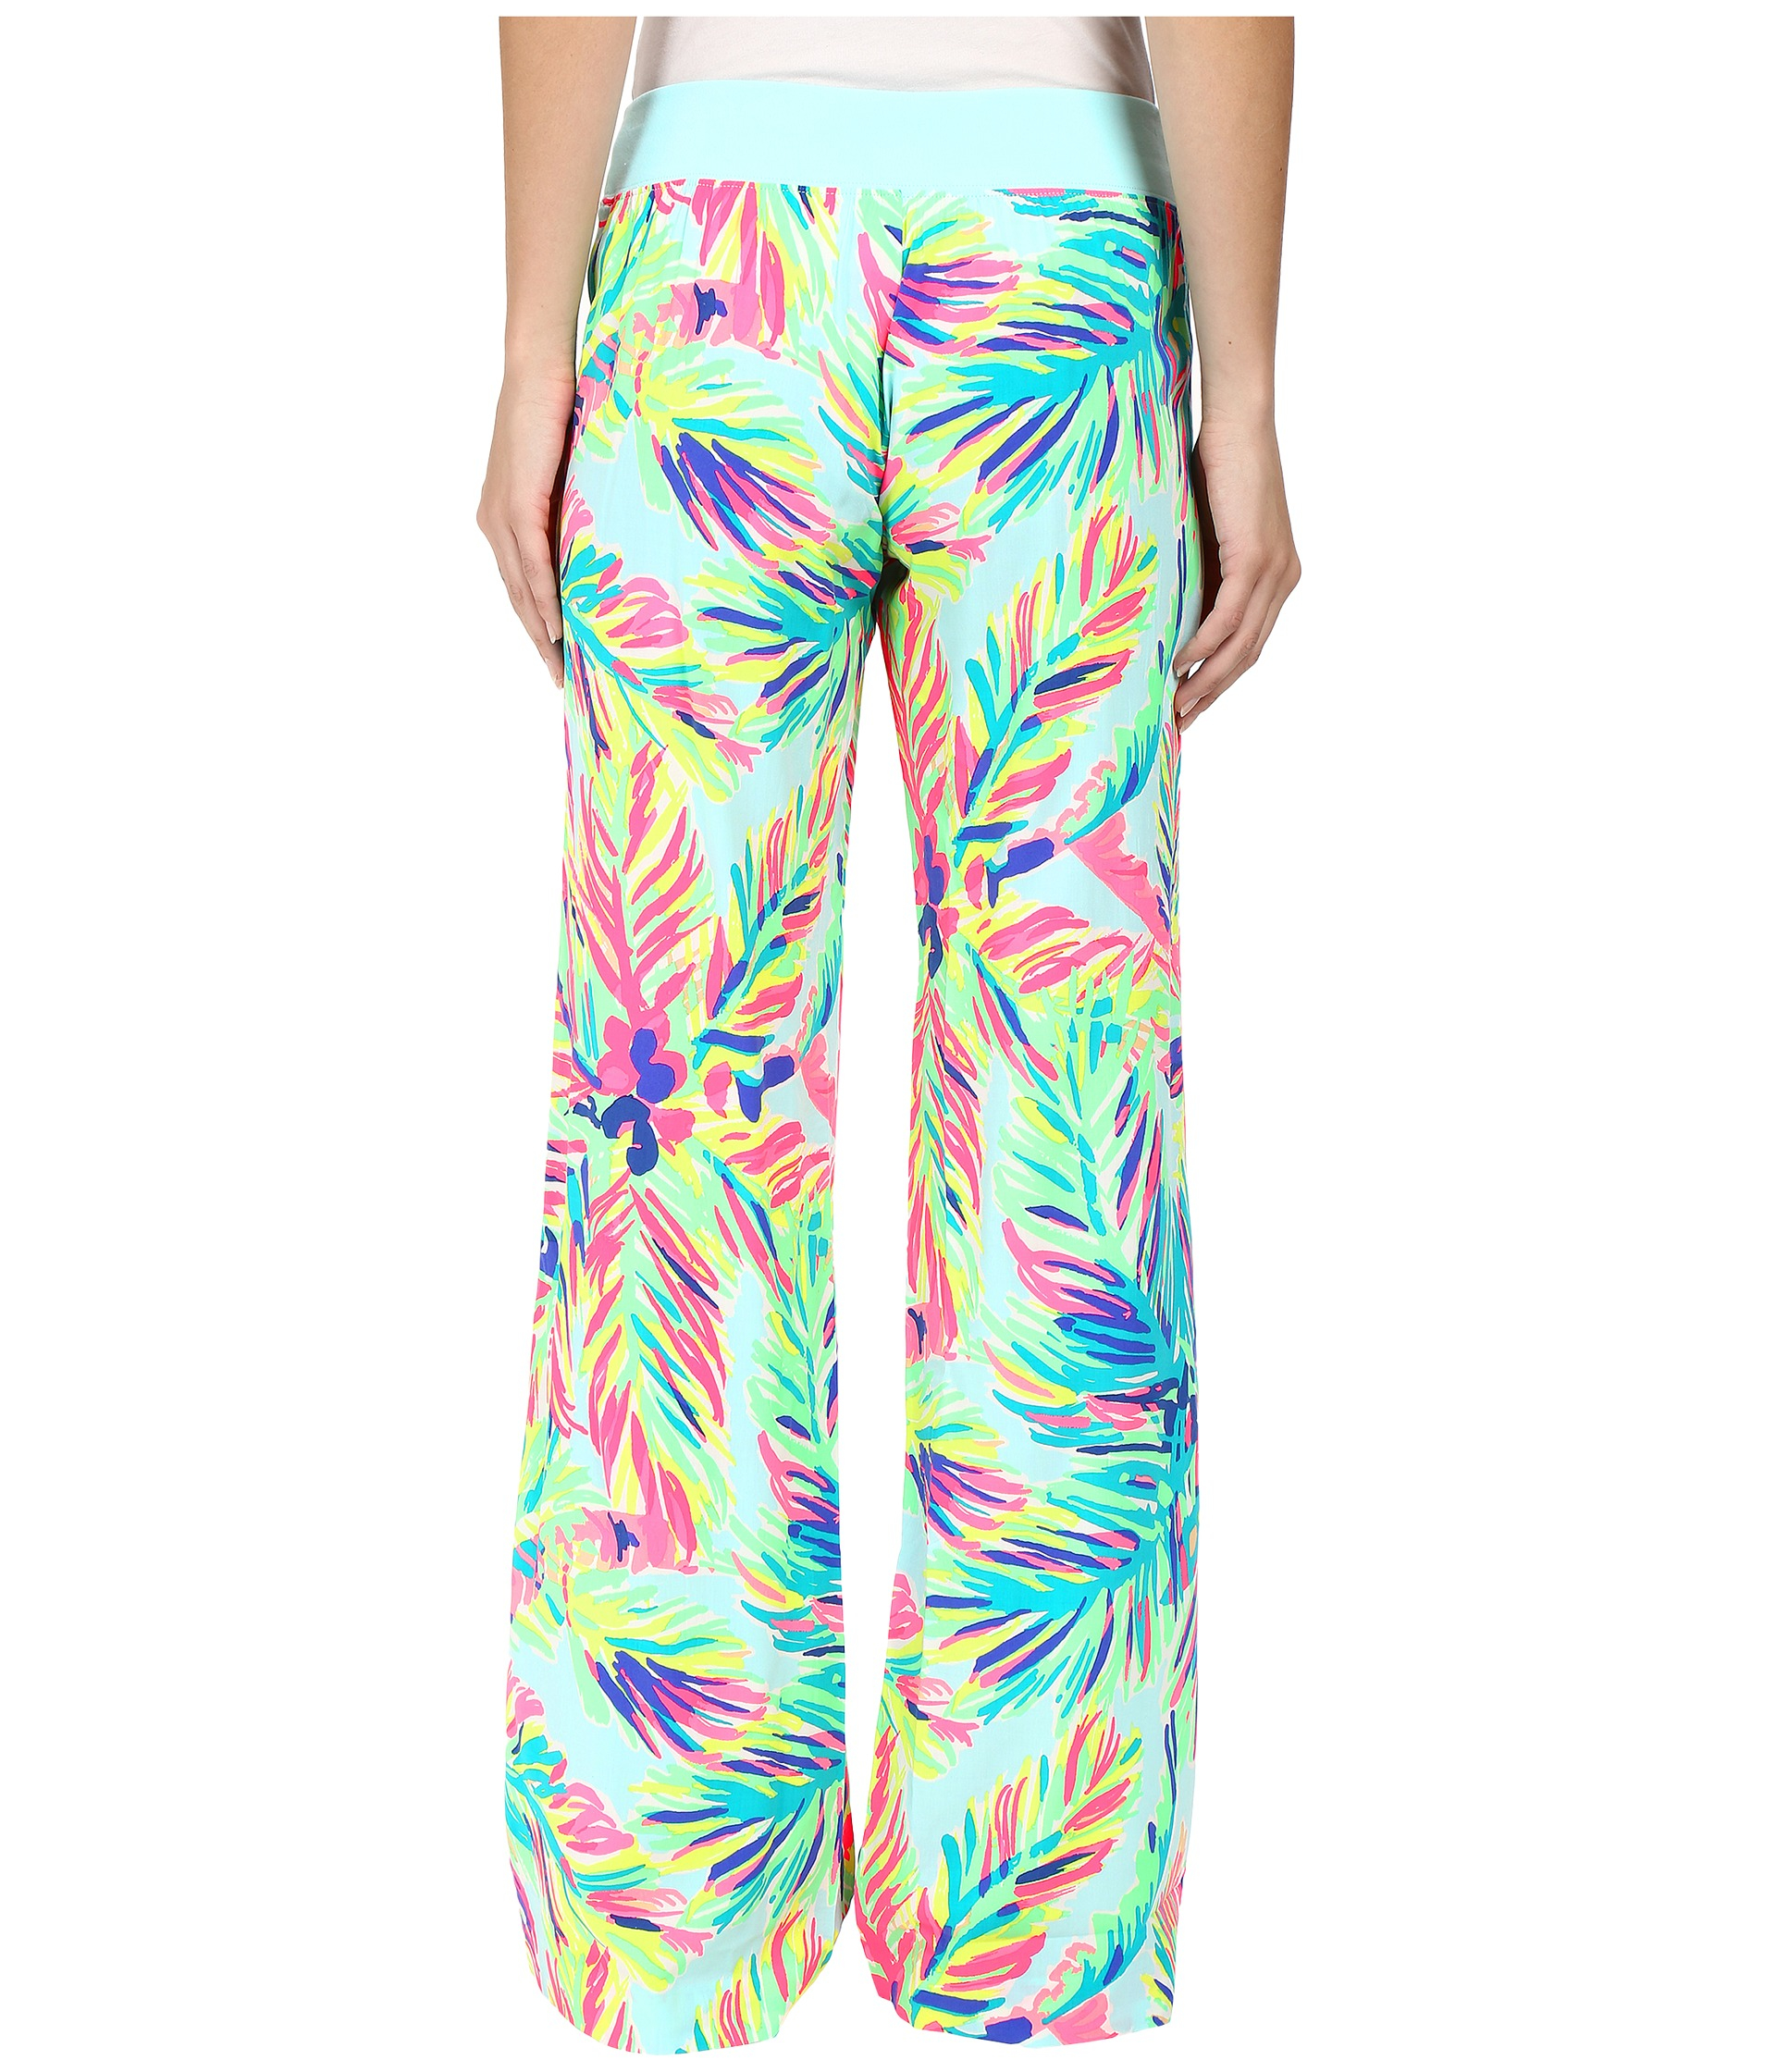 Lyst - Lilly Pulitzer Seaside Beach Palazzo Pants in Blue